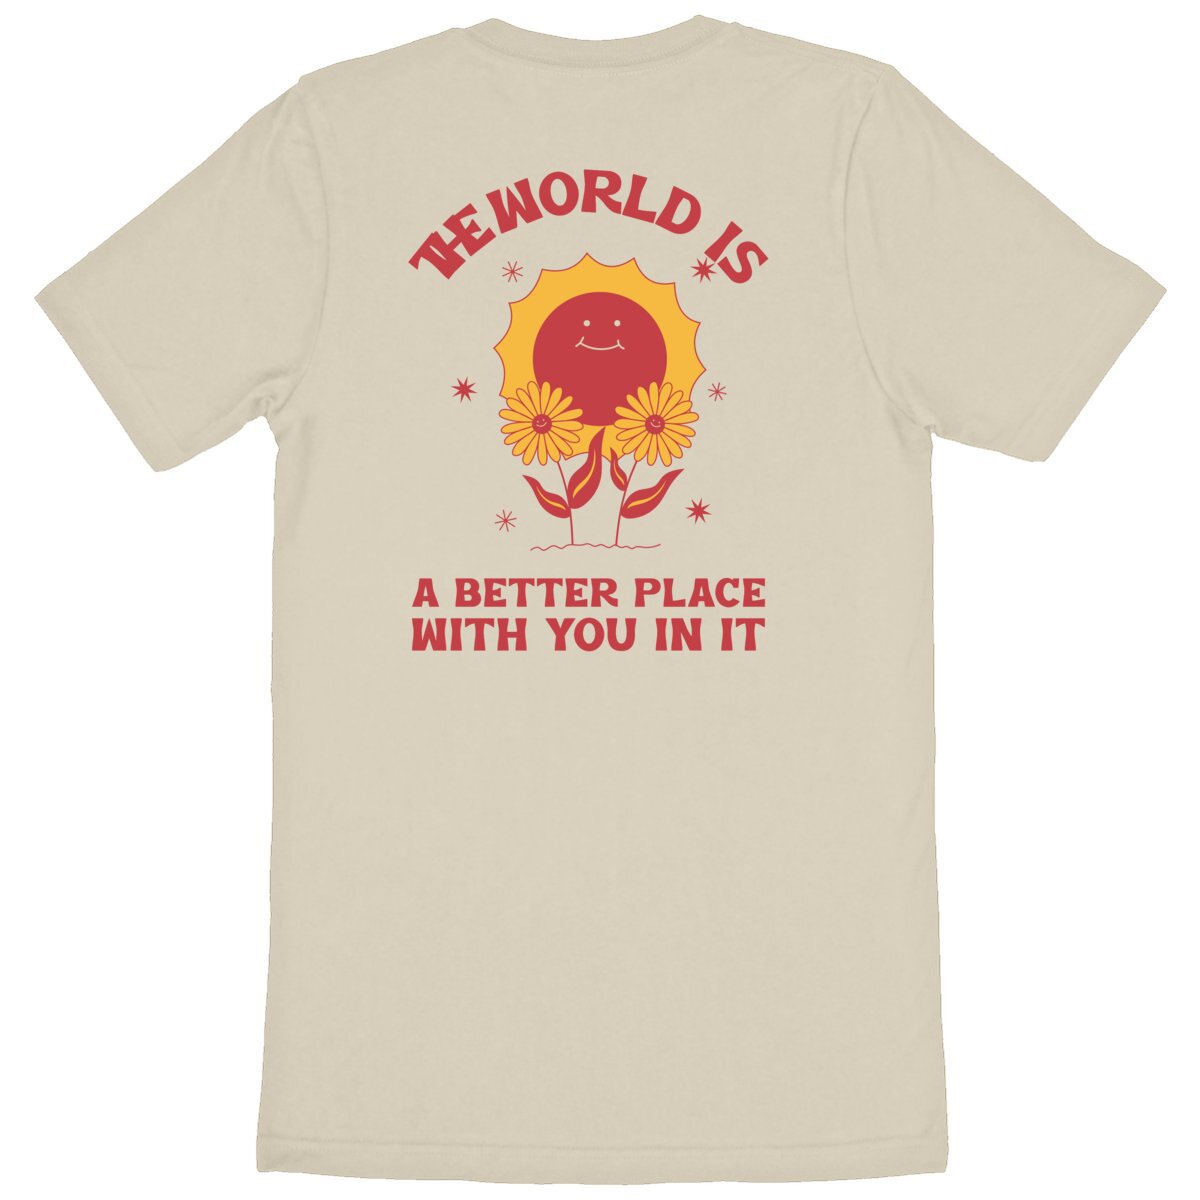 The World is a better place with You in it - Unisex Organic T-shirt